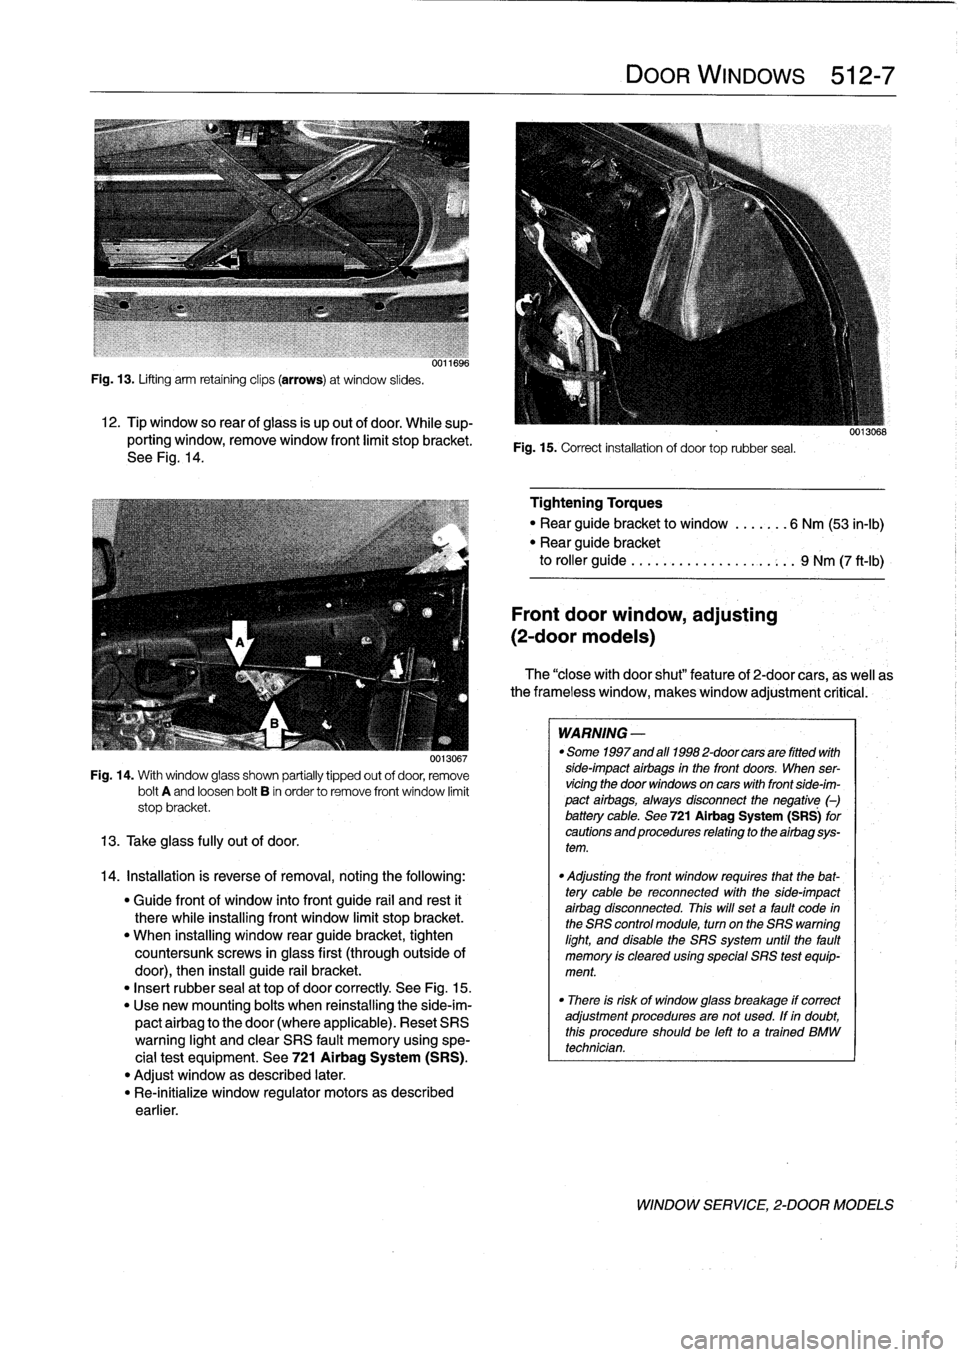 BMW 323i 1998 E36 Workshop Manual 
Fig
.
13
.
Lifting
arm
retaining
clips
(arrows)
at
window
slides
.

12
.
Tip
window
so
rear
ofglass
is
up
out
of
door
.
While
sup-
porting
window,
remove
window
front
limit
stopbracket
.
See
Fig
.
14